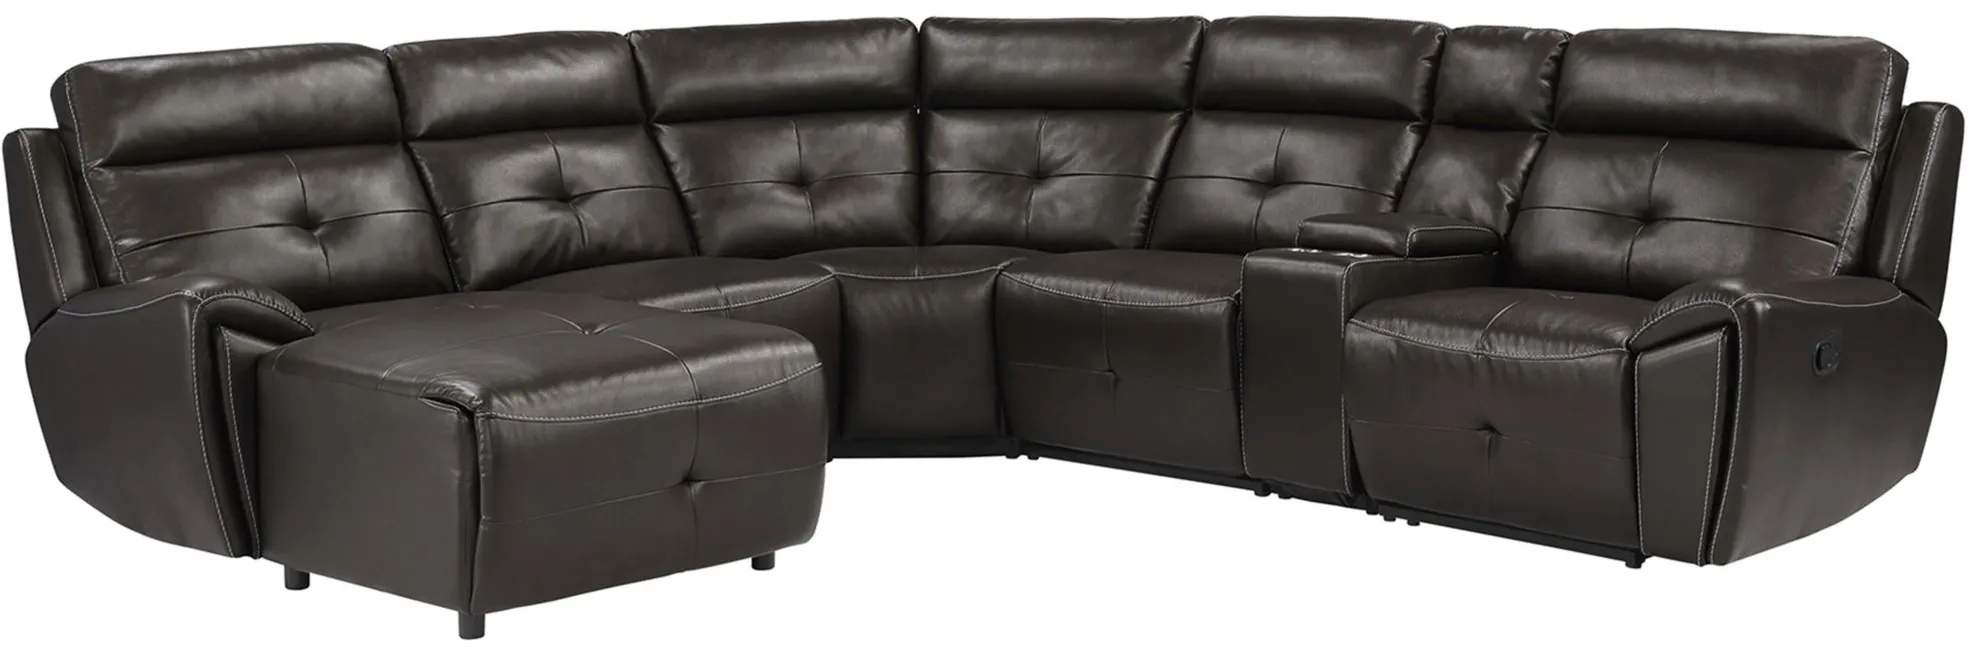 Morelia 6-pc. Modular Reclining Sectional Sofa with Left Arm Facing Chaise in Dark Brown by Homelegance